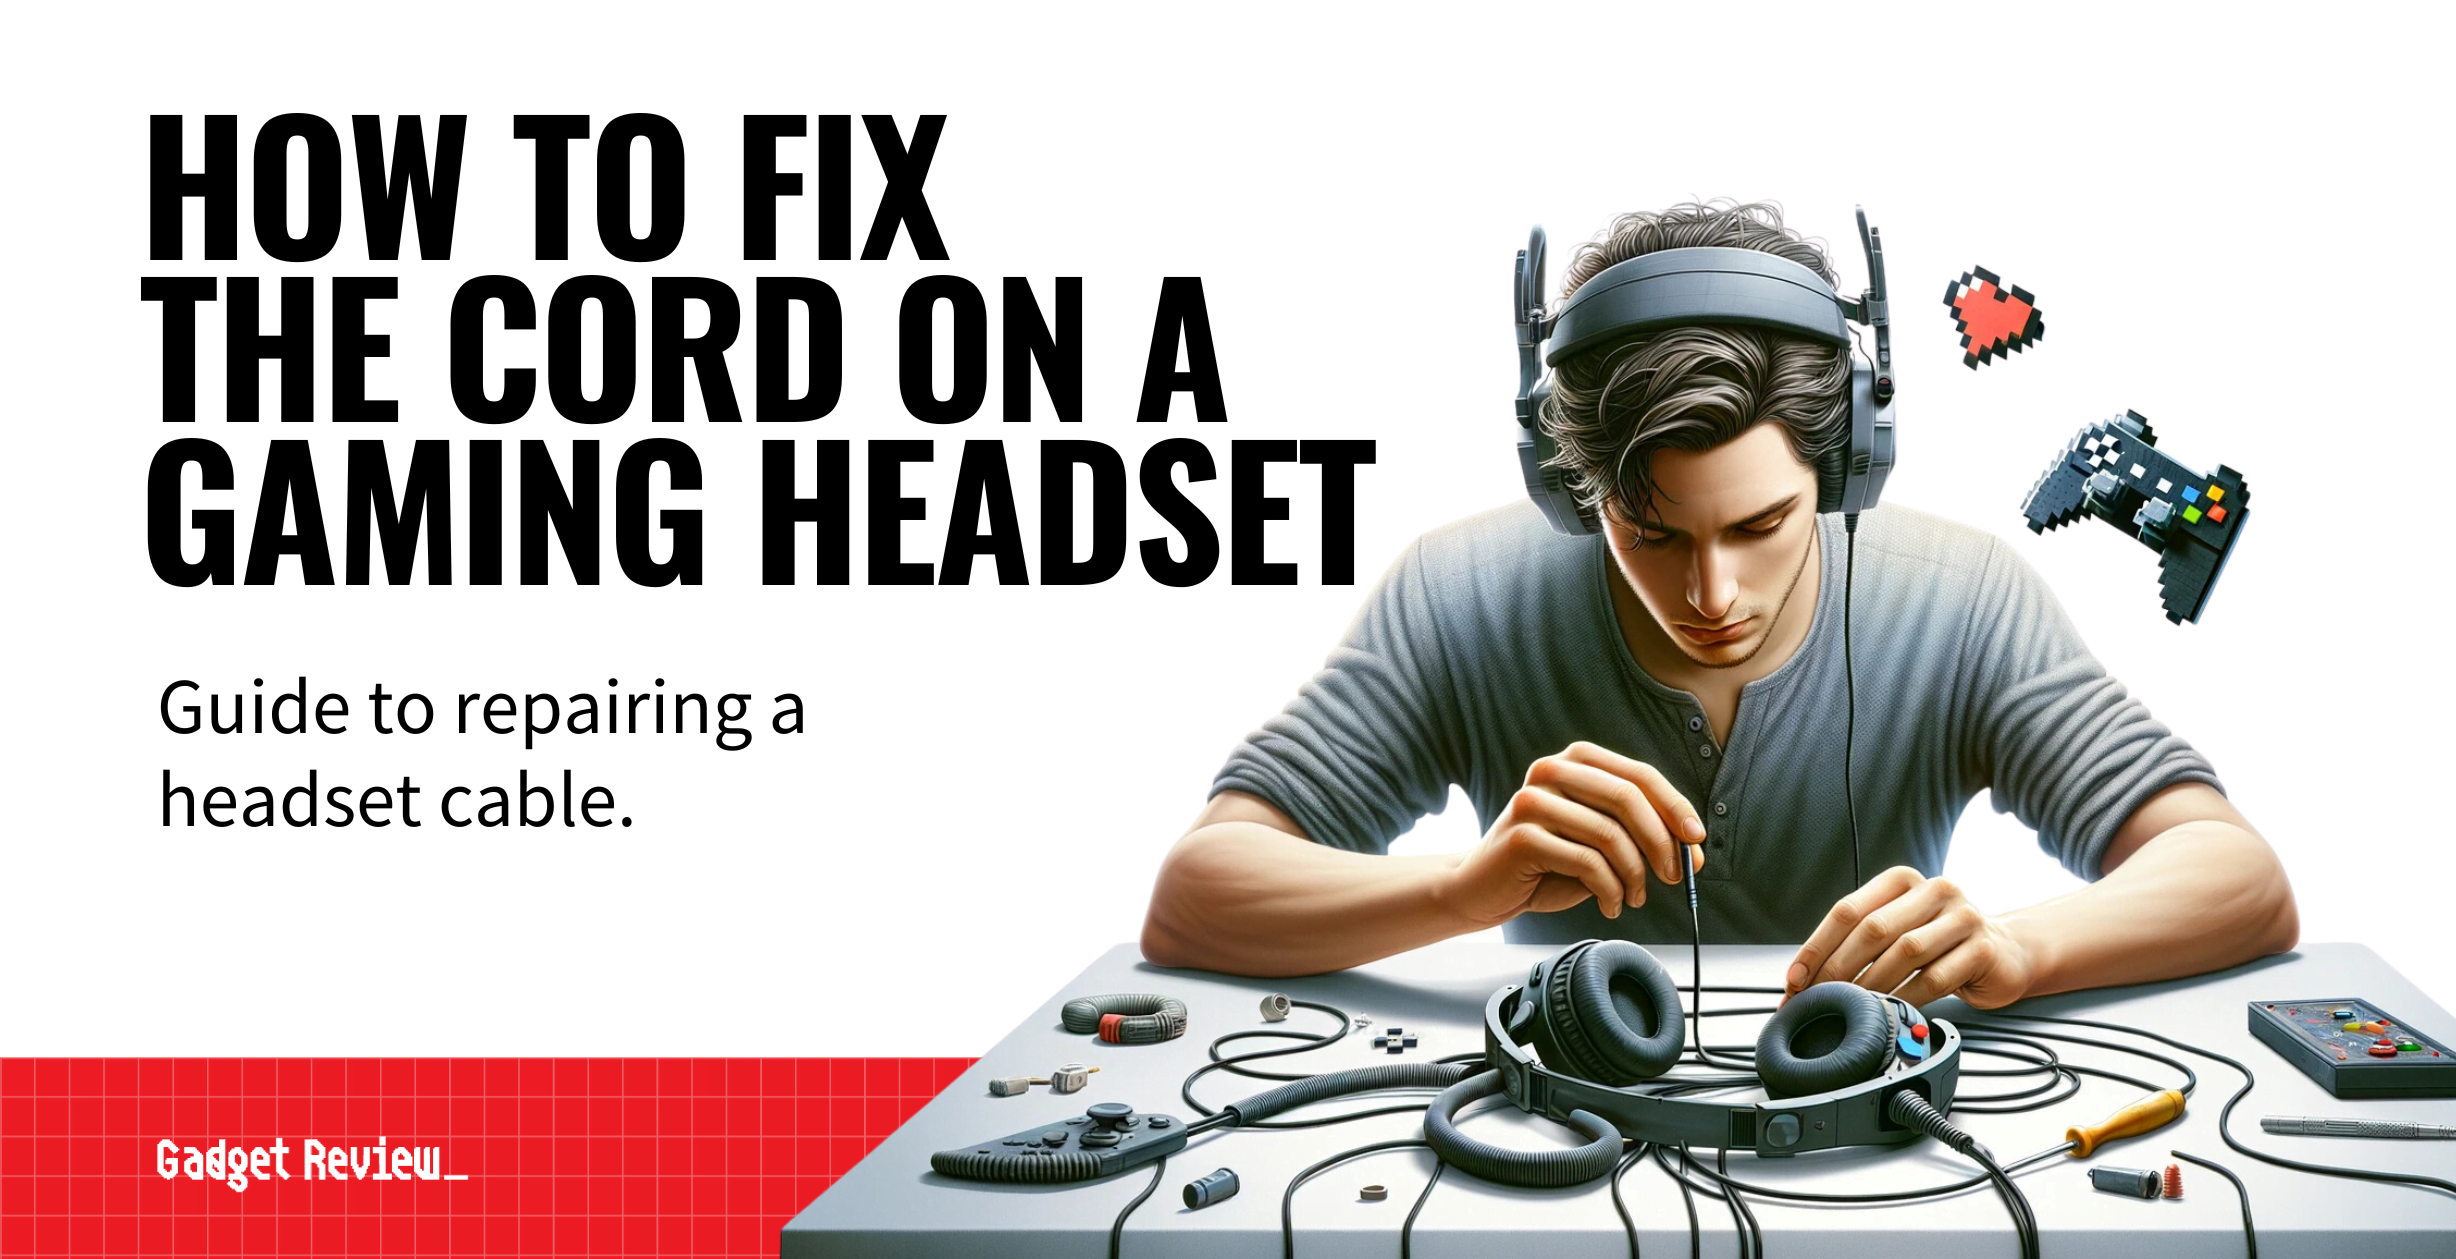 How to Fix the Cord on a Gaming Headset